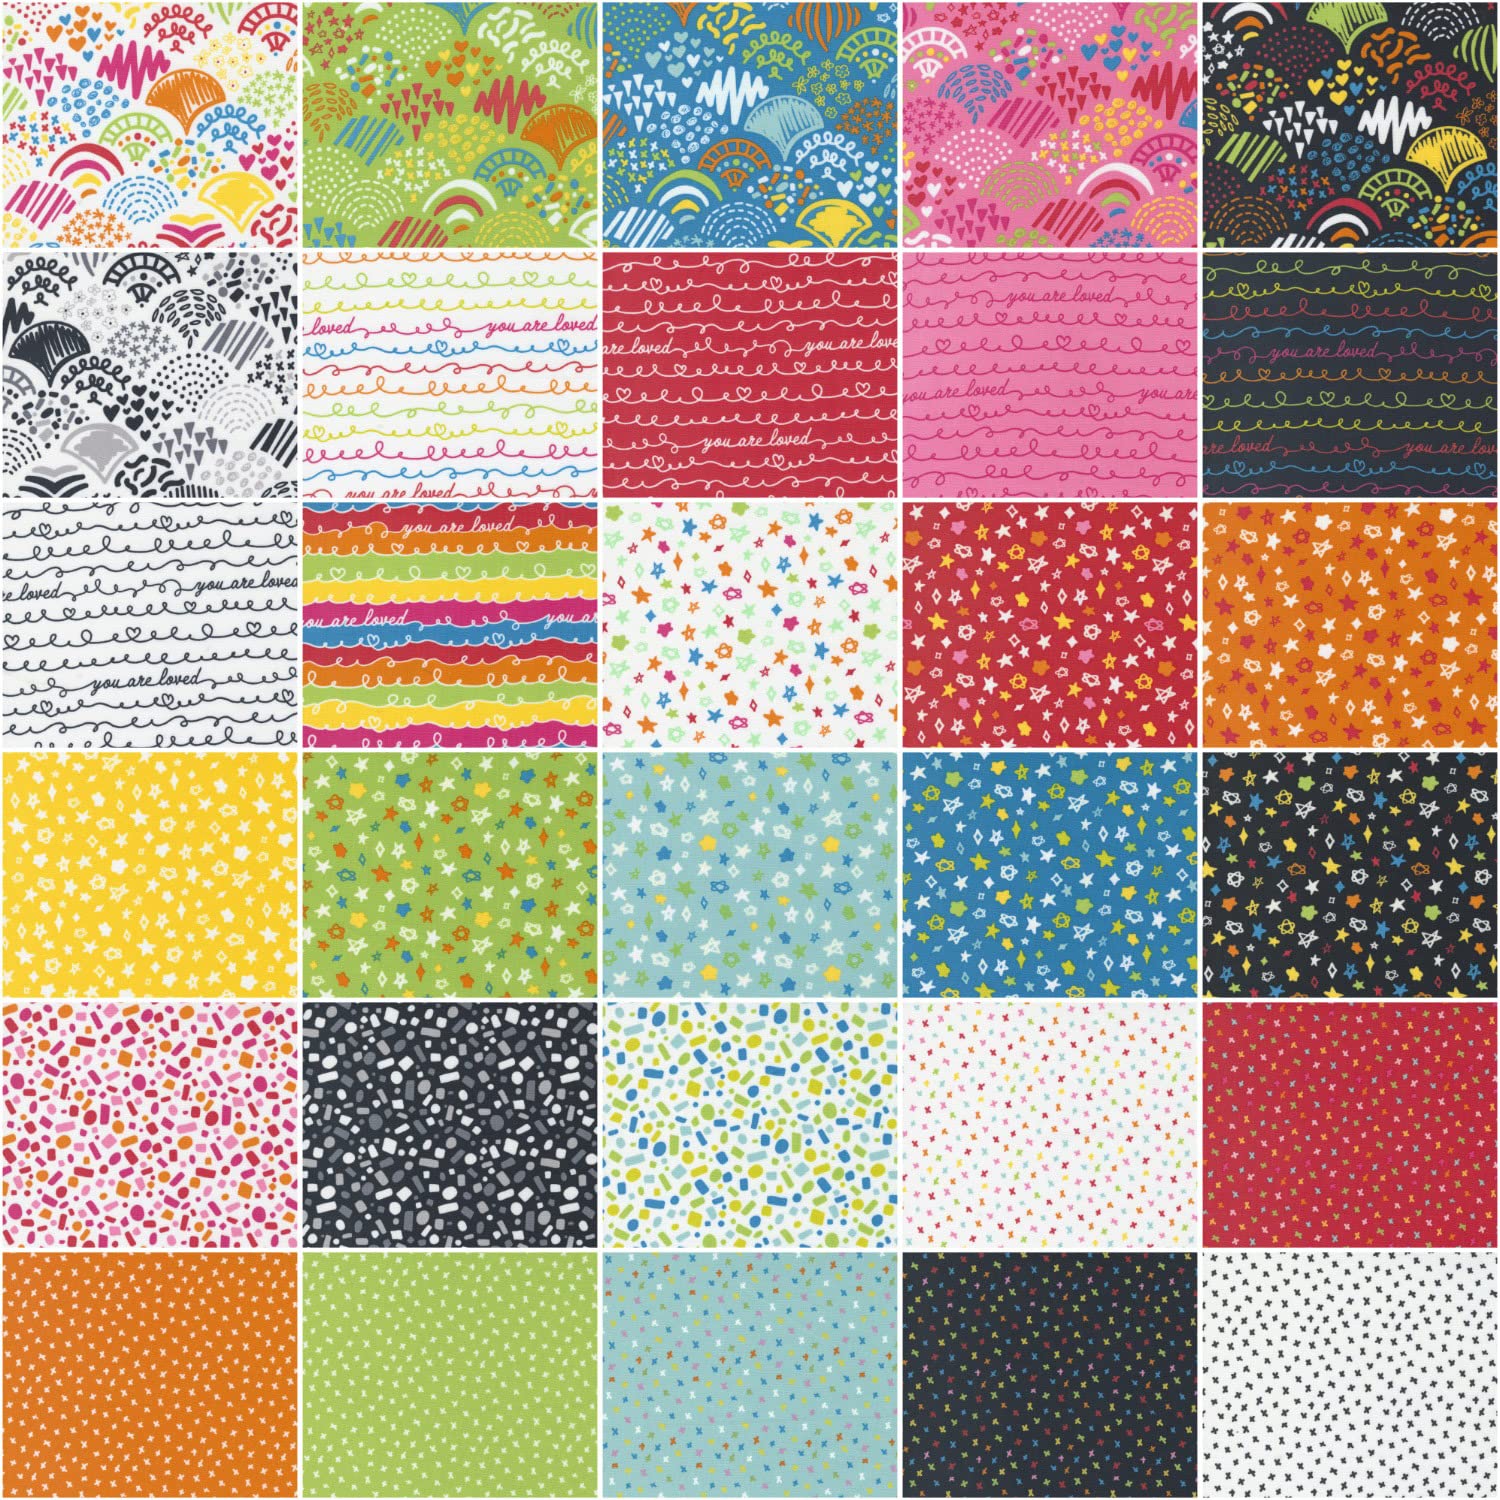 Creativity Glows Charm Pack by Creativity Shell; 42 - 5" Precut Fabric Quilt Squares